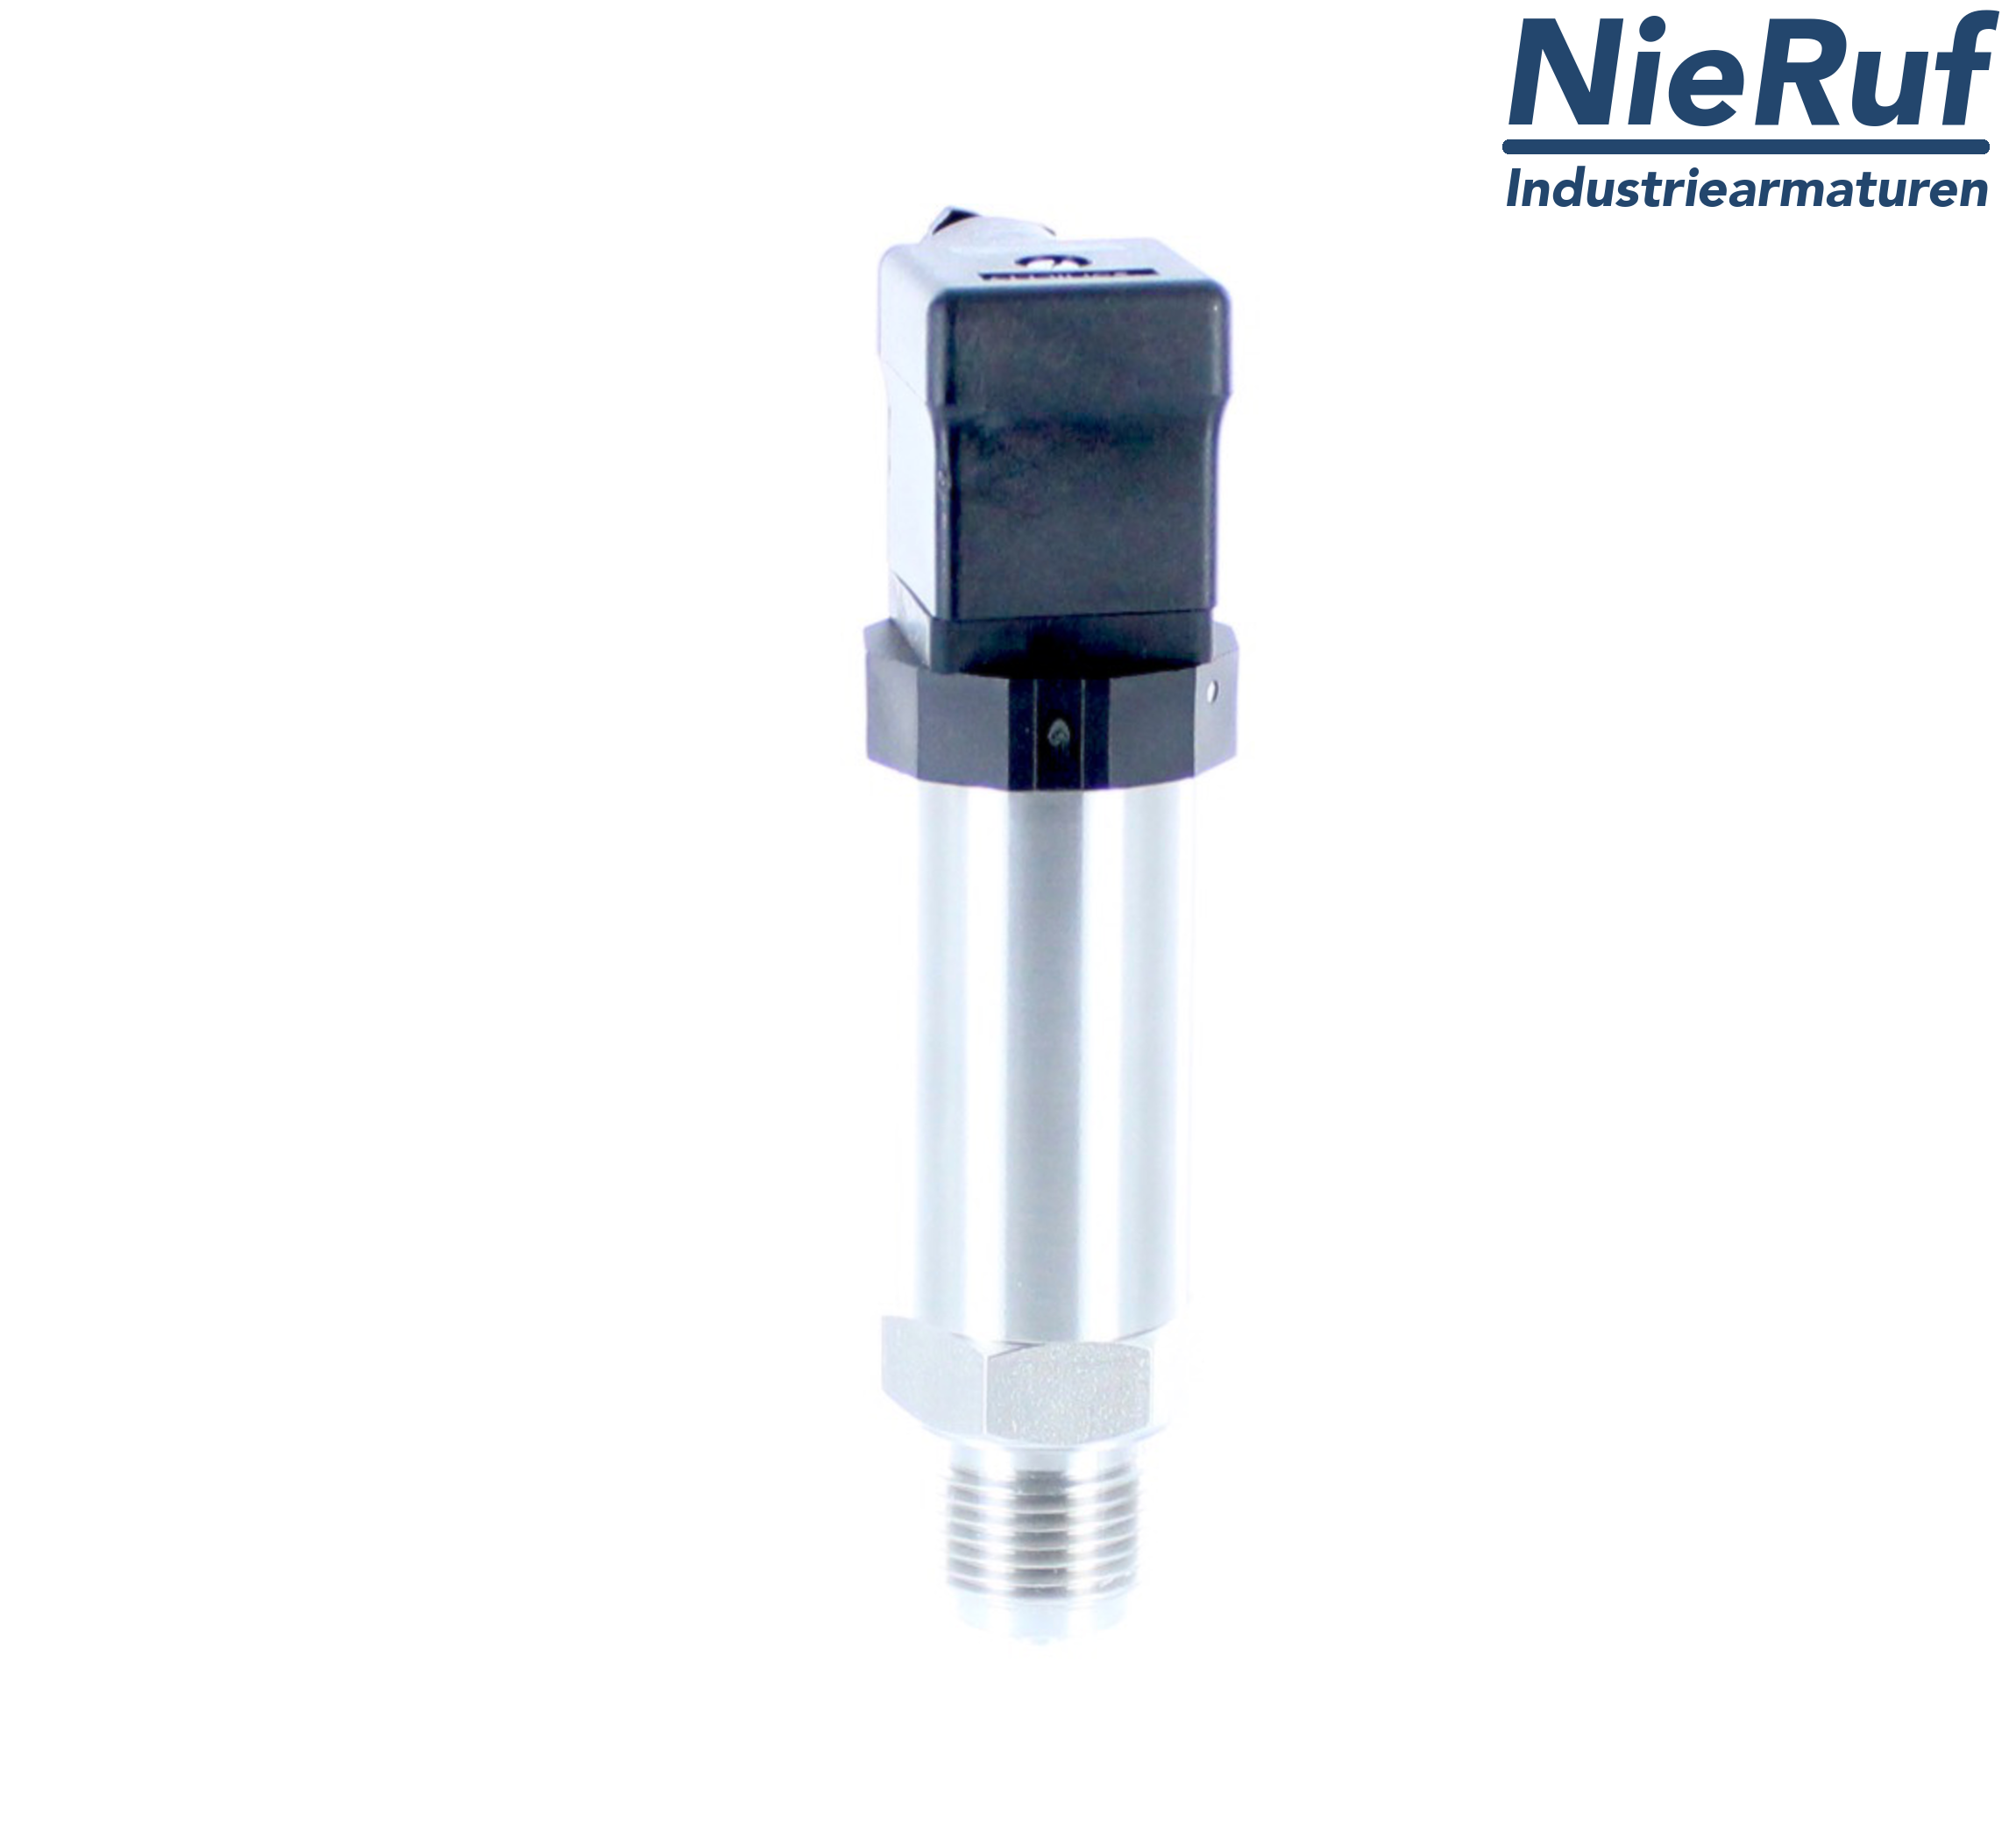 pressure sensor G 1/2" B DS01 stainless steel 2-wire: 4-20mA FPM 0,0 - 160,0 bar